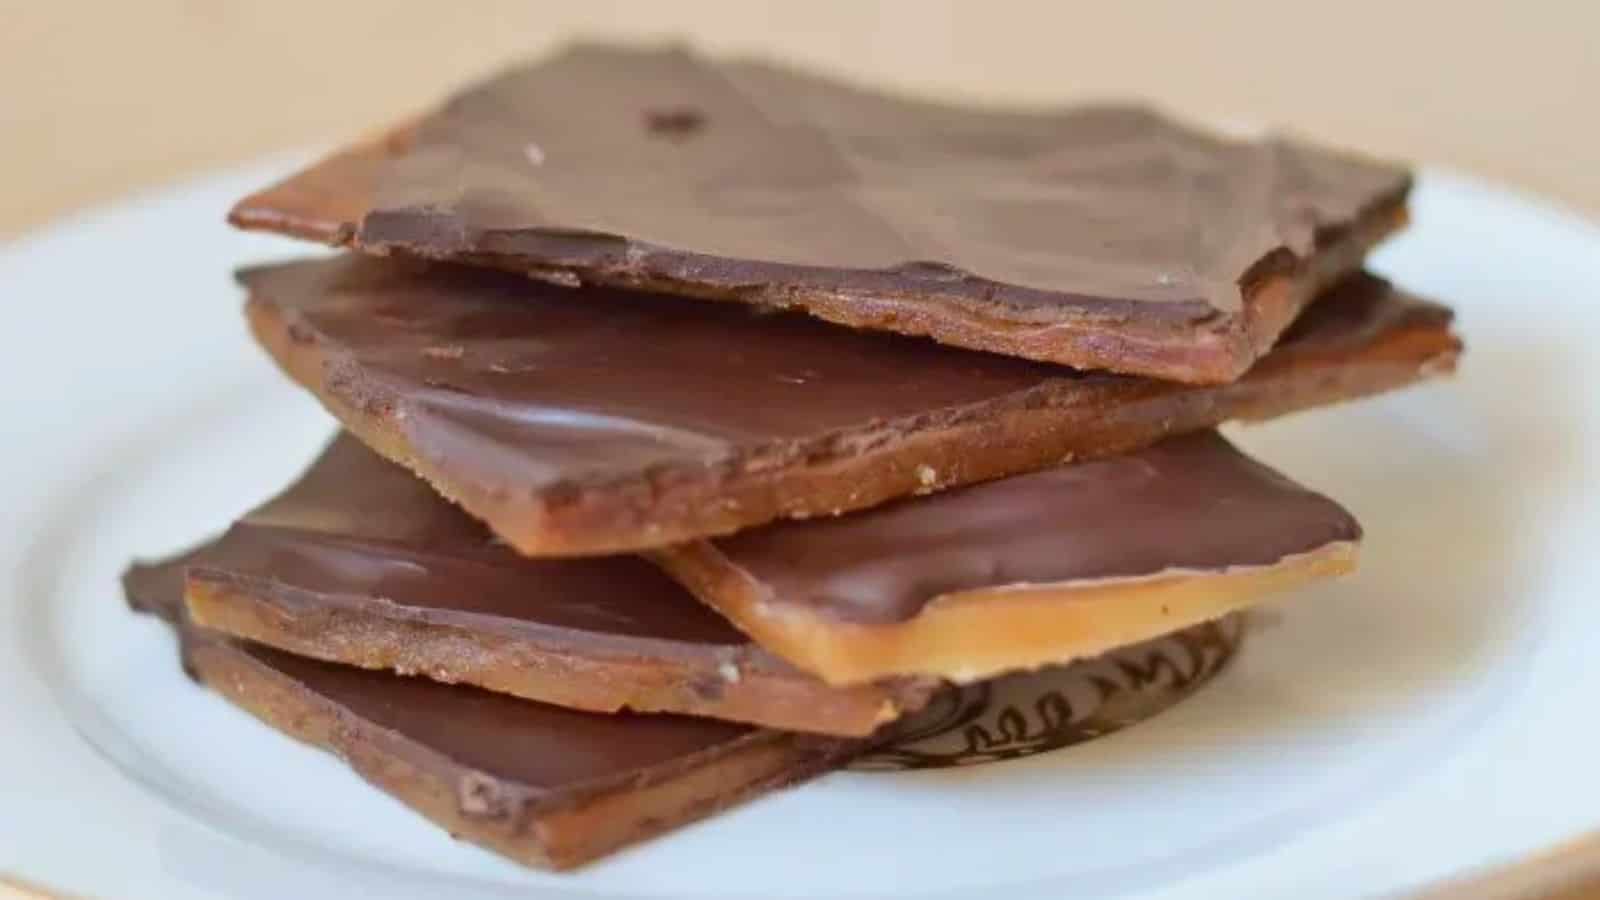 Image shows a stack of English Toffee on a white plate.